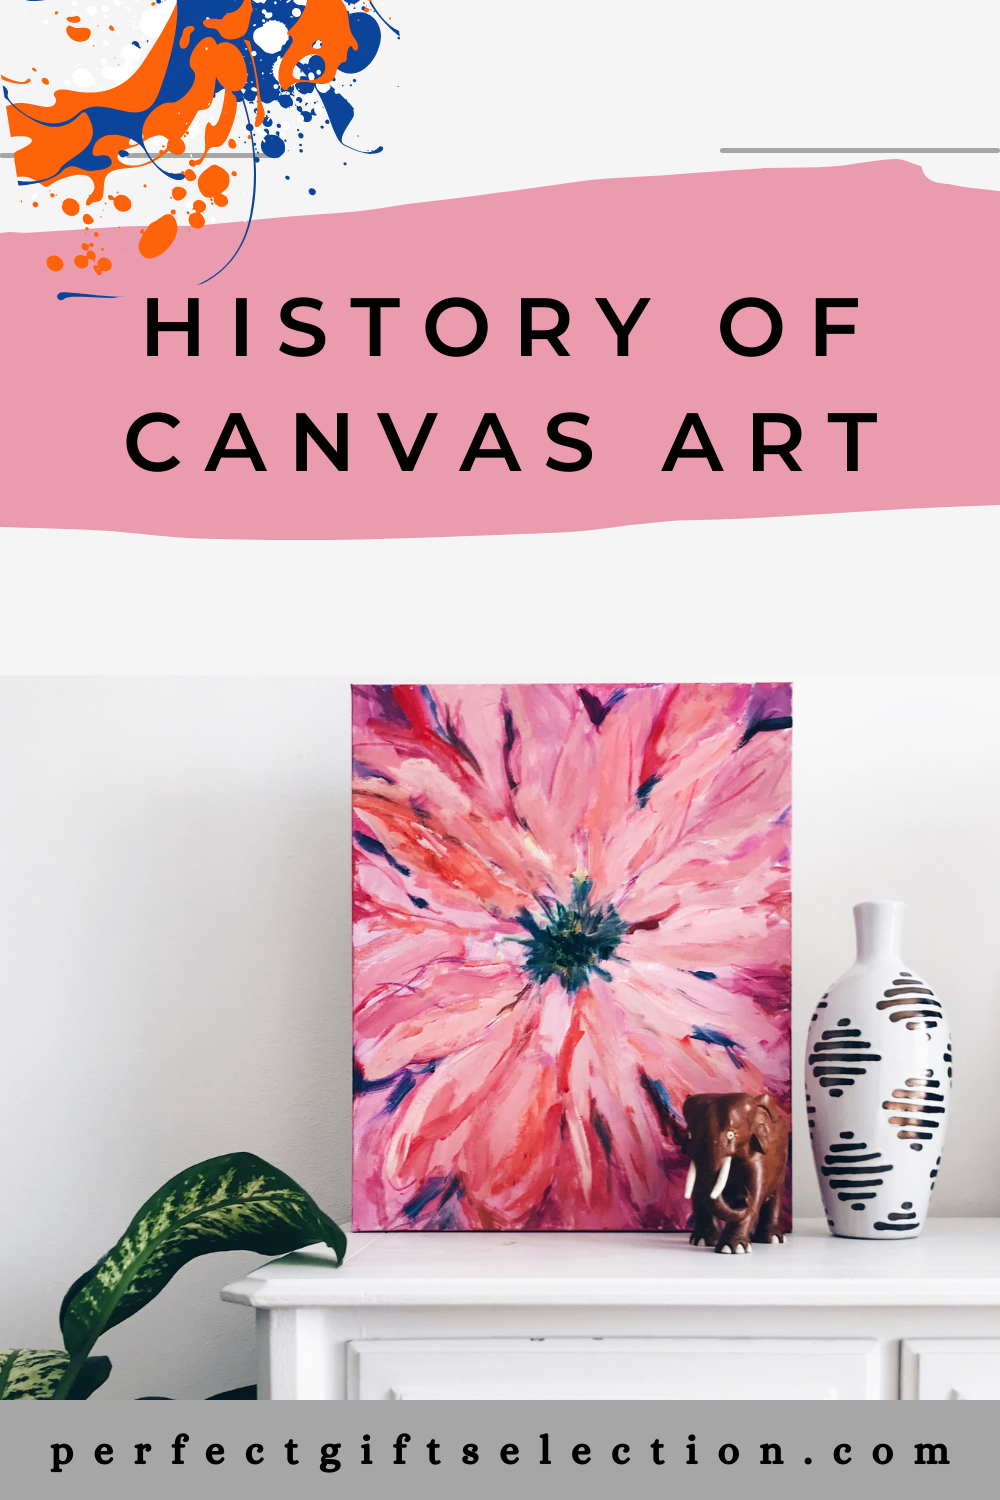 The History of Canvas Art: From the Renaissance to Modern Times